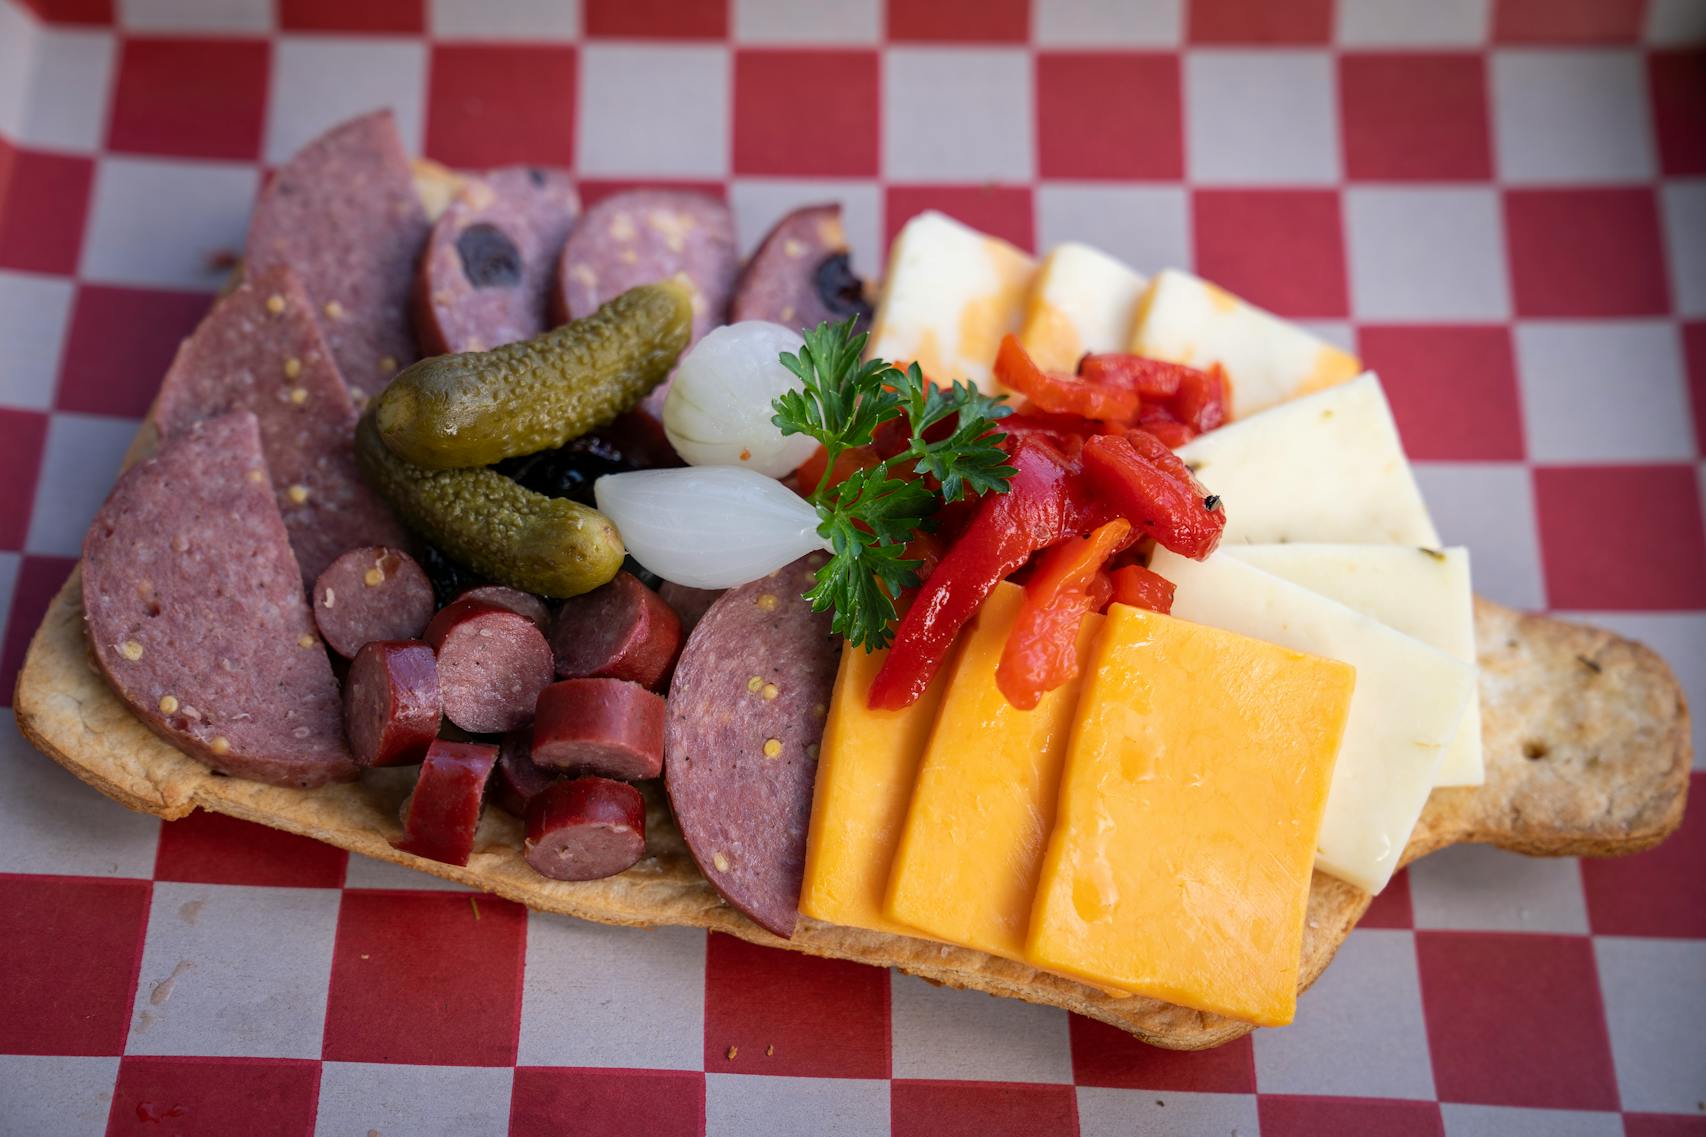 Sota-cuterie Board from Sabino’s Pizza Pies. The new foods of the 2023 Minnesota State Fair photographed on the first day of the fair in Falcon Heights, Minn. on Tuesday, Aug. 8, 2023. ] LEILA NAVIDI • leila.navidi@startribune.com